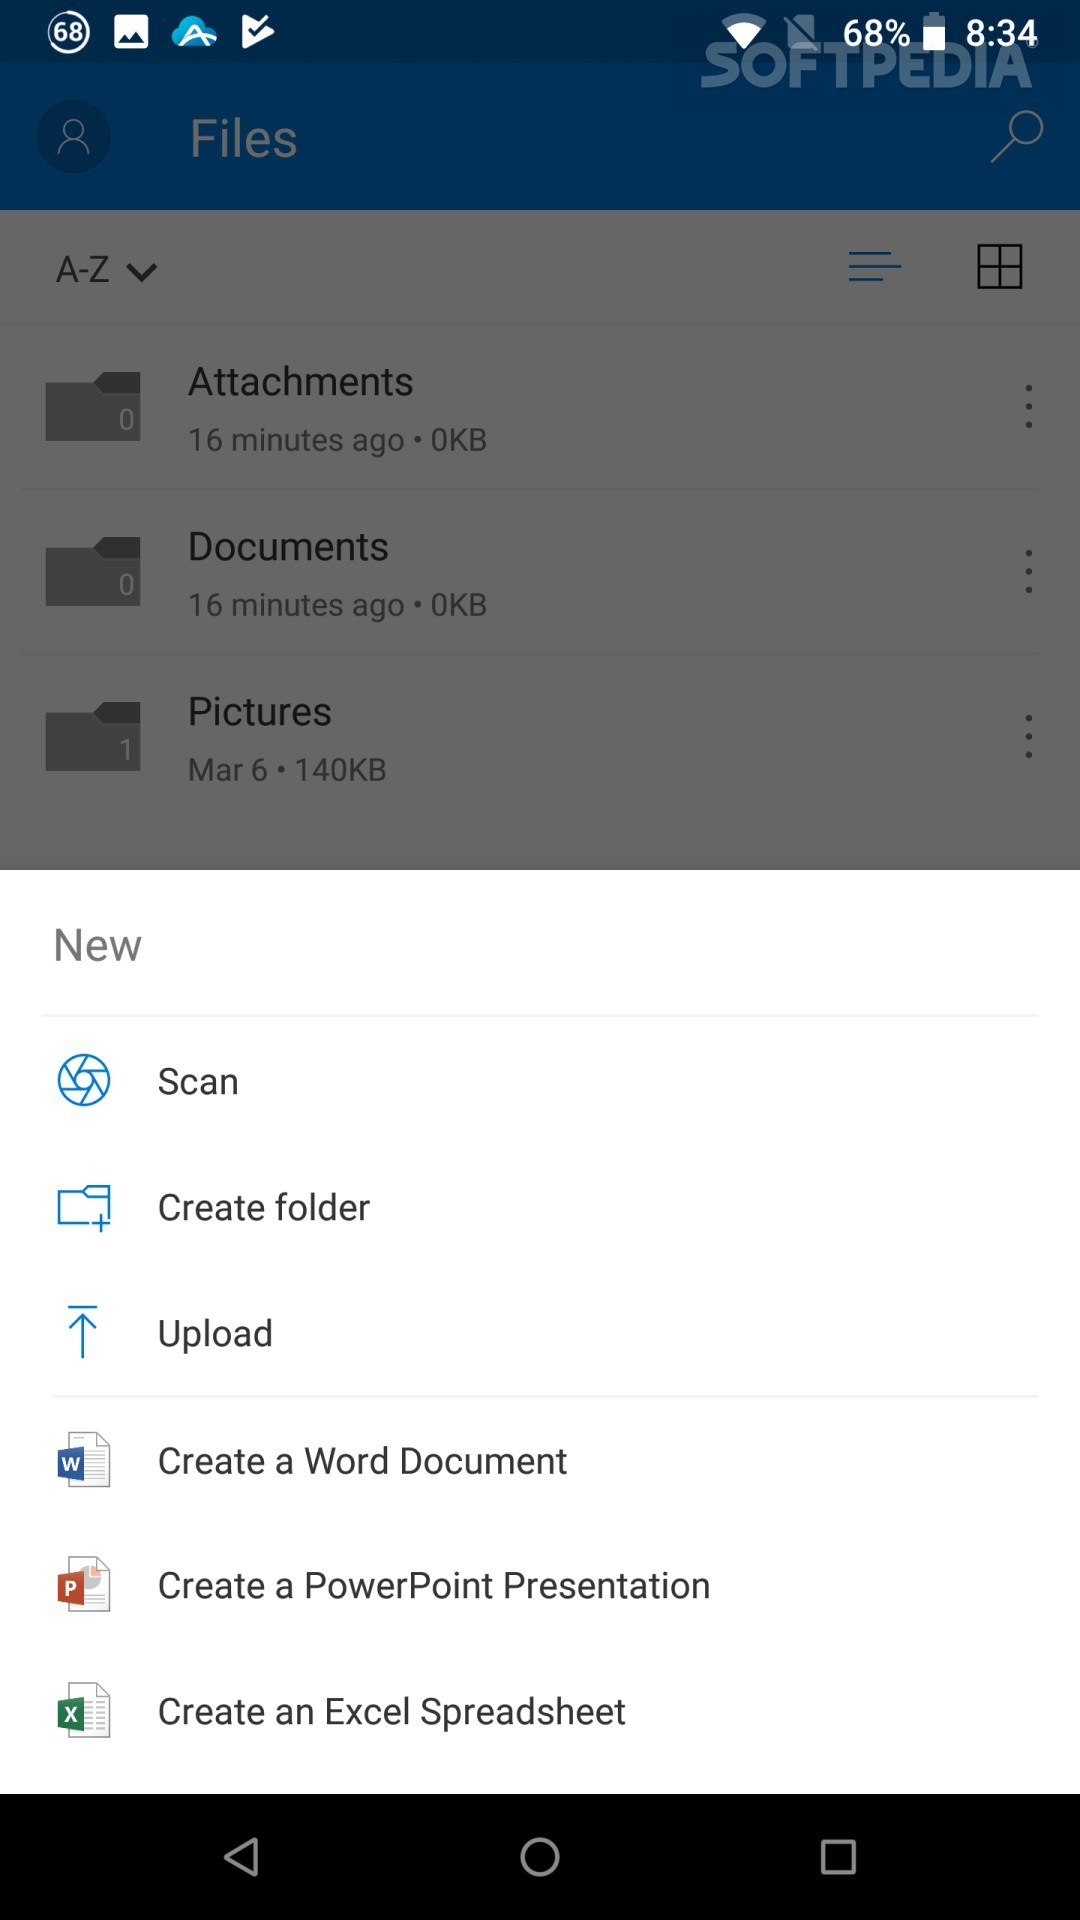 where do onedrive downloads go on android